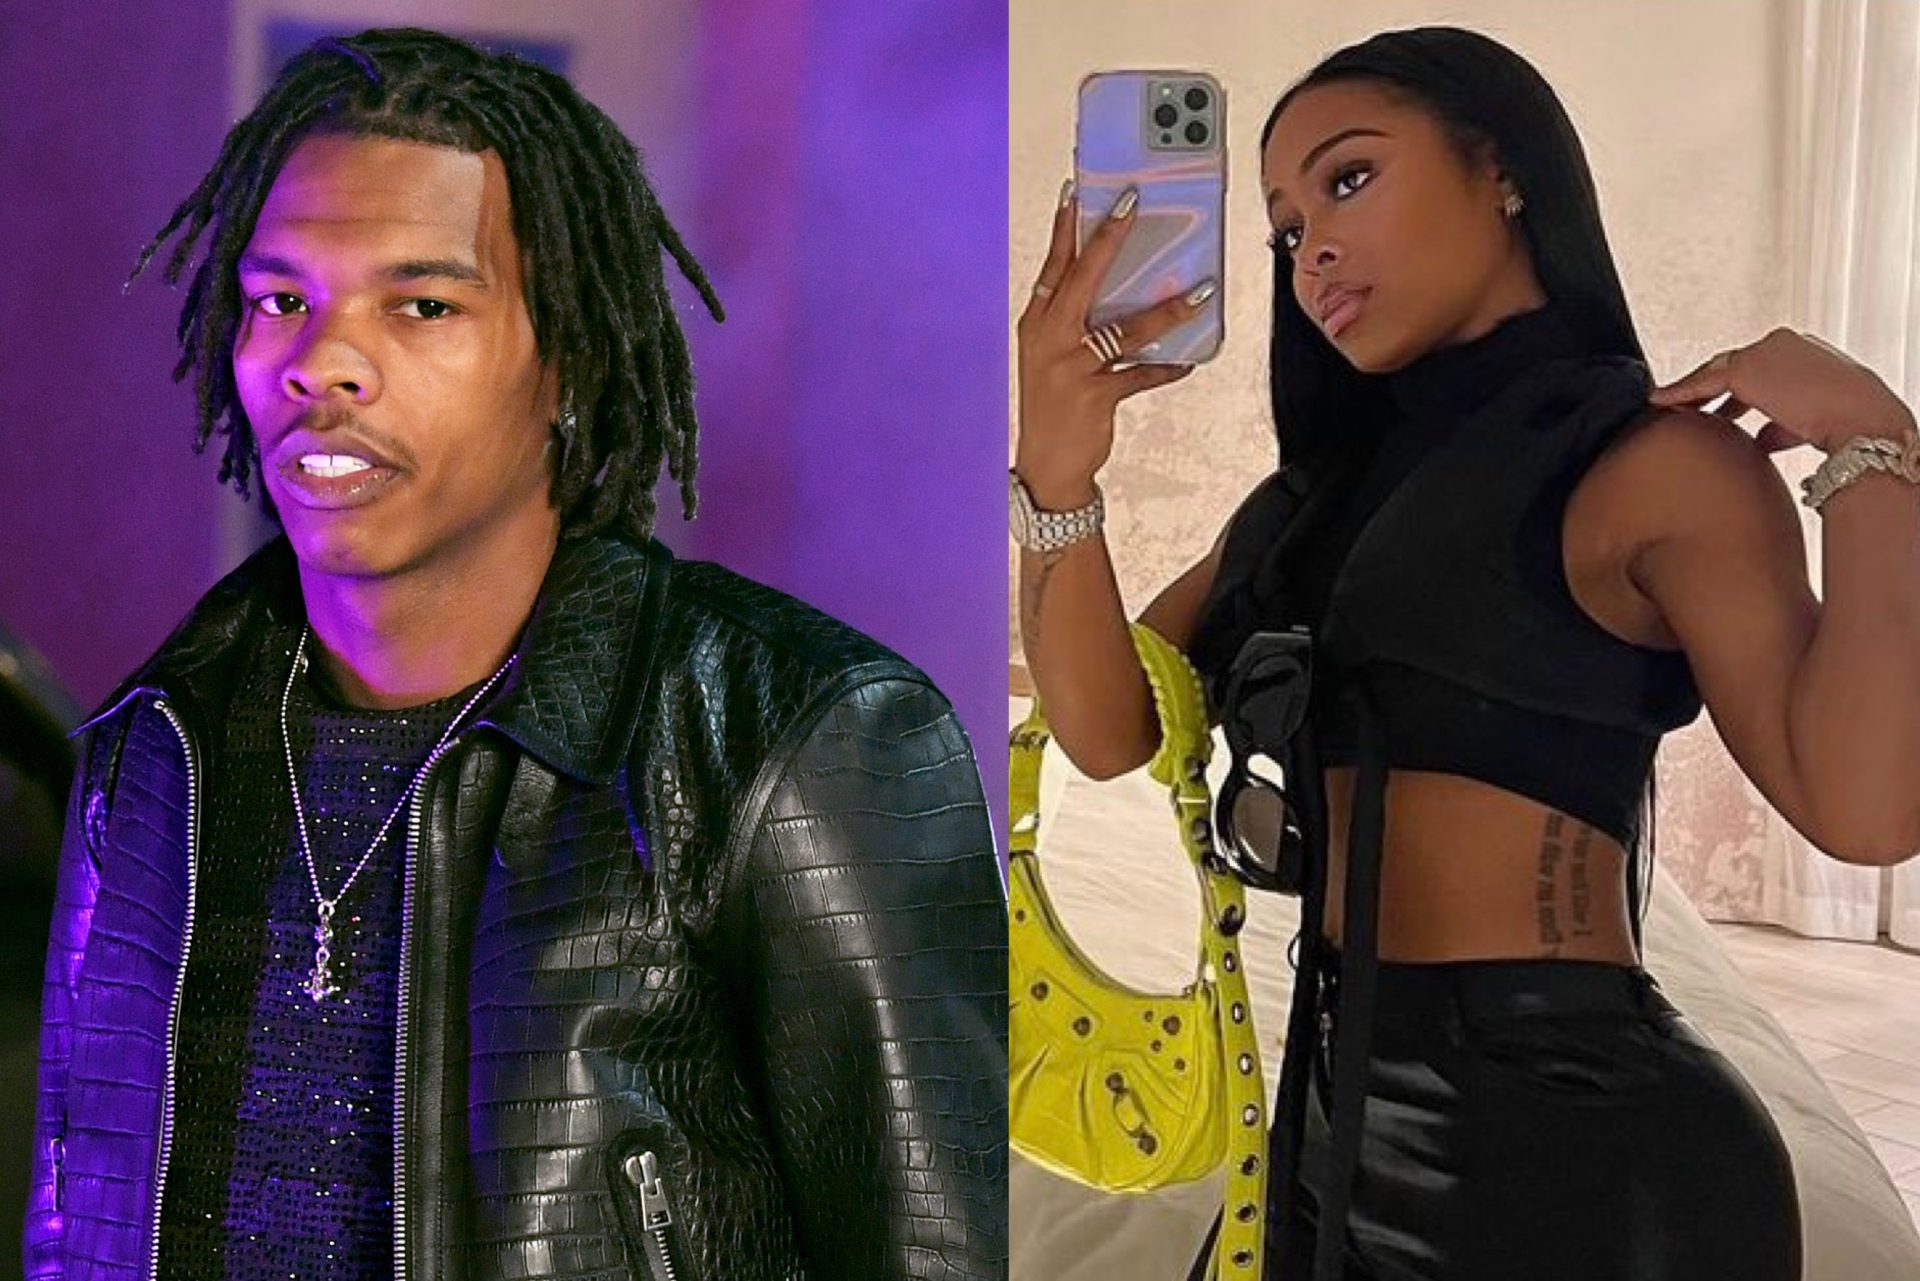 Lil Baby And Jayda Cheaves Seemingly Exchange Break-Up Subliminals